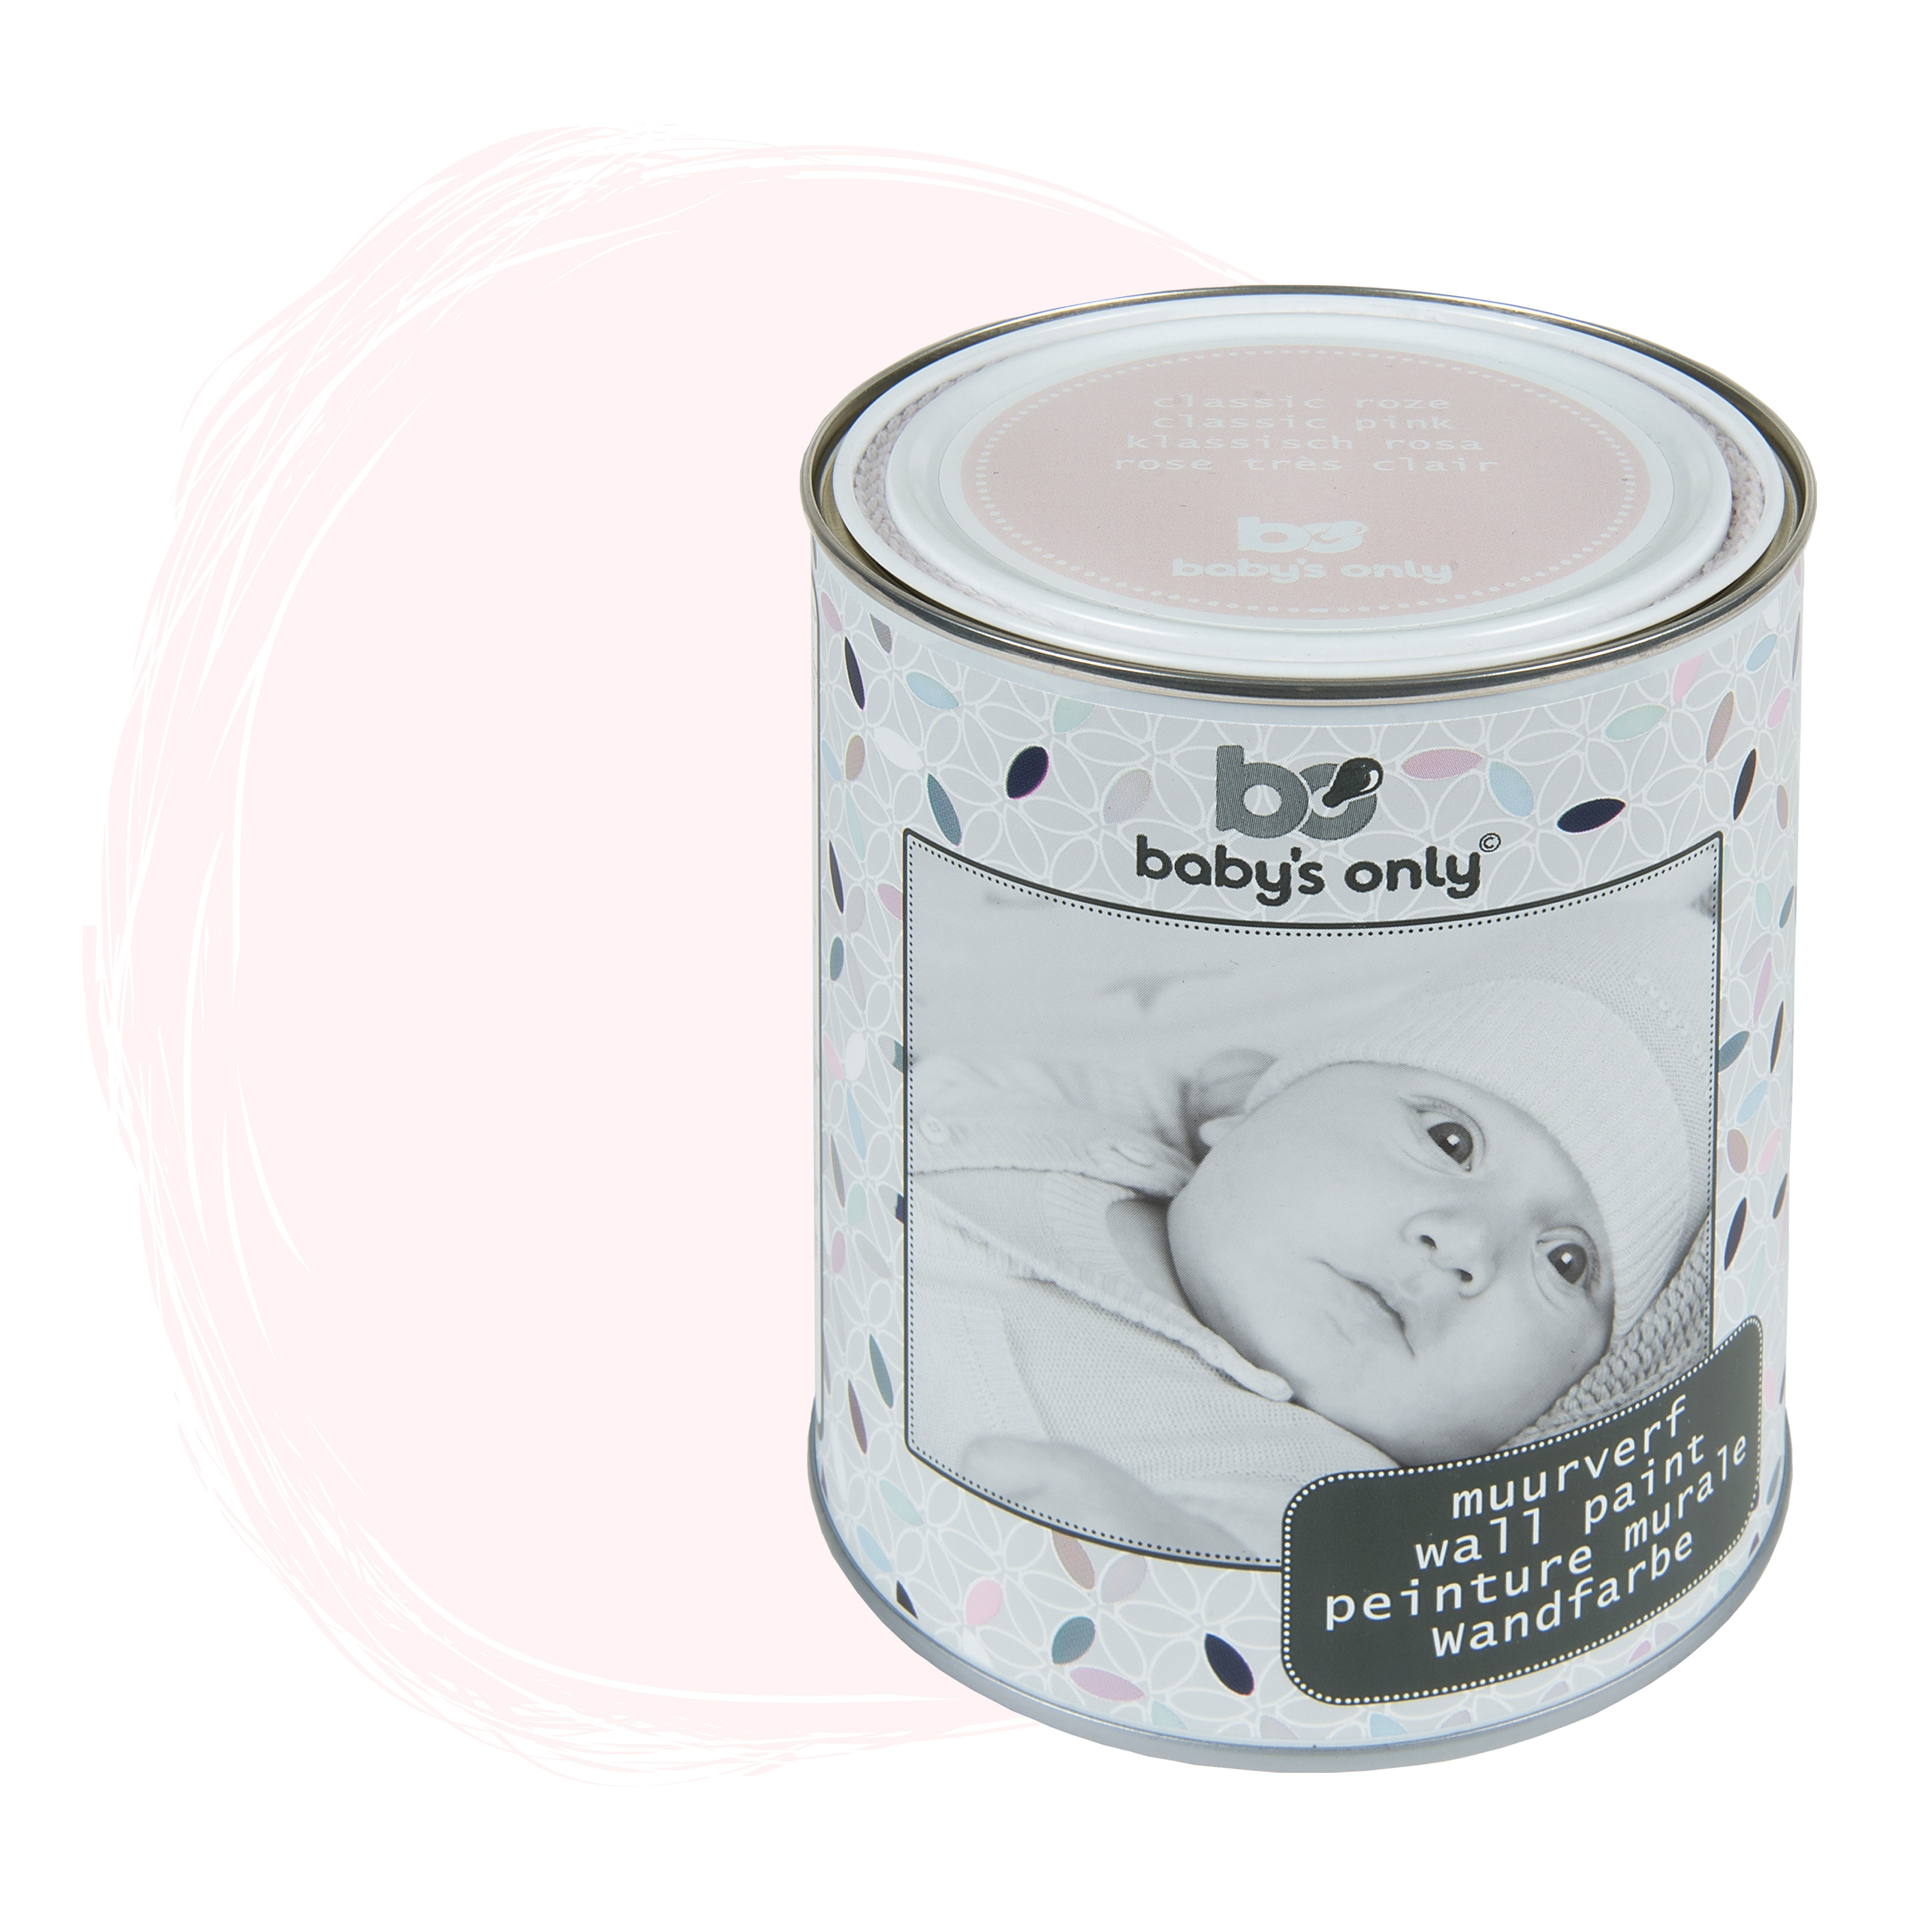 Wall paint classic pink - 1 liter